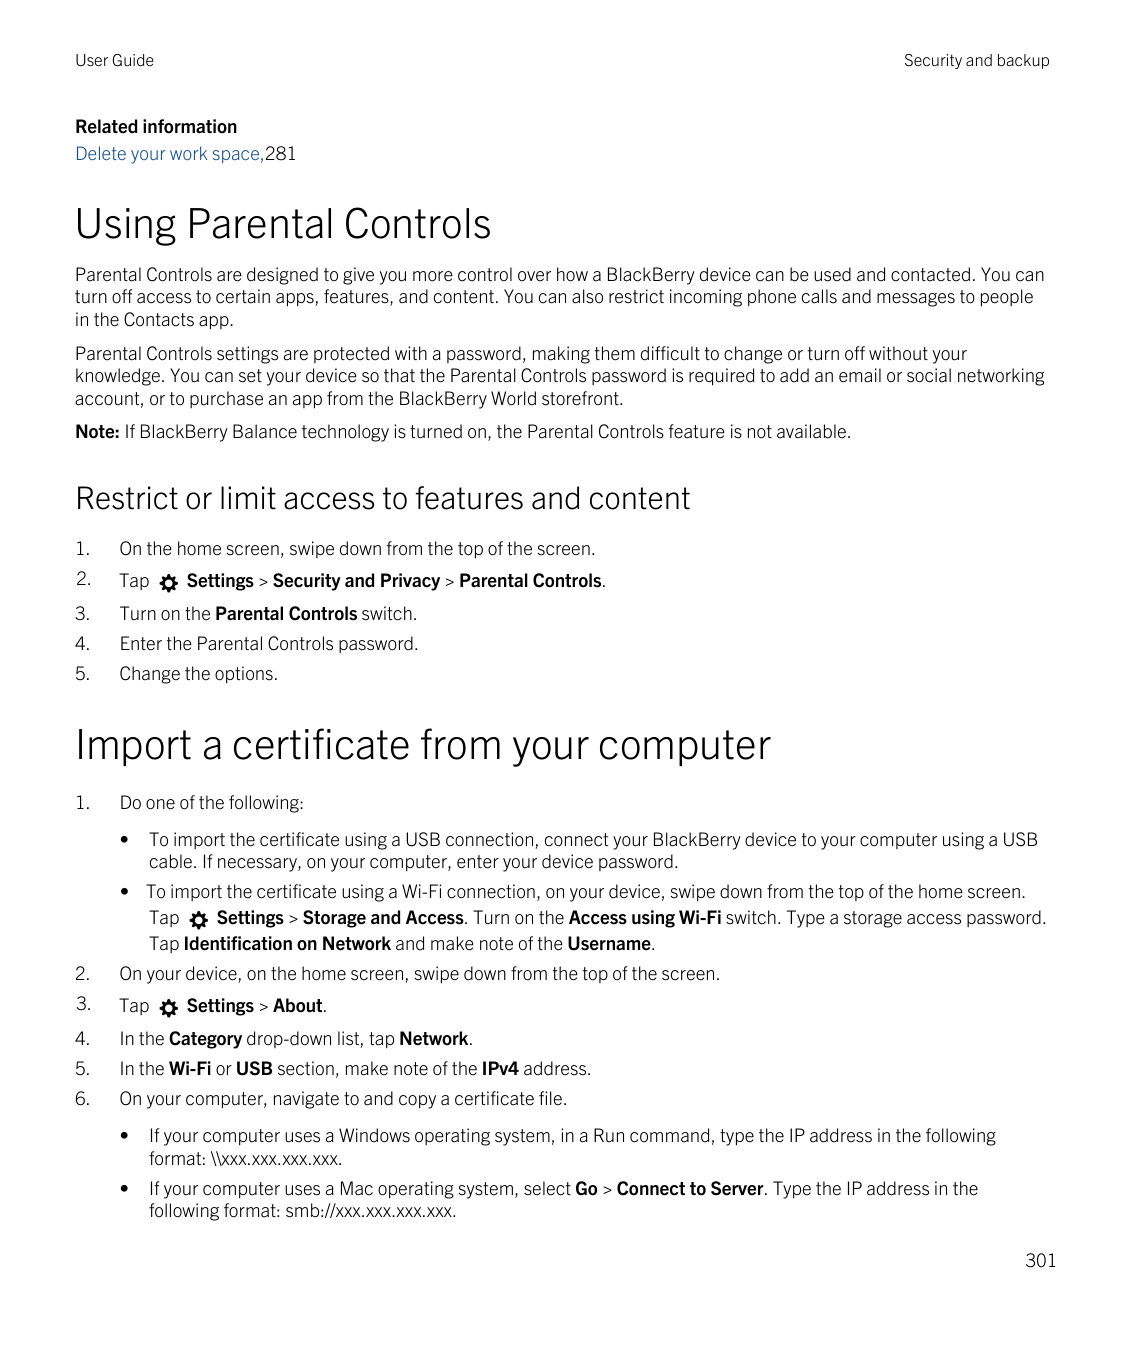 User GuideSecurity and backupRelated informationDelete your work space,281Using Parental ControlsParental Controls are designed 